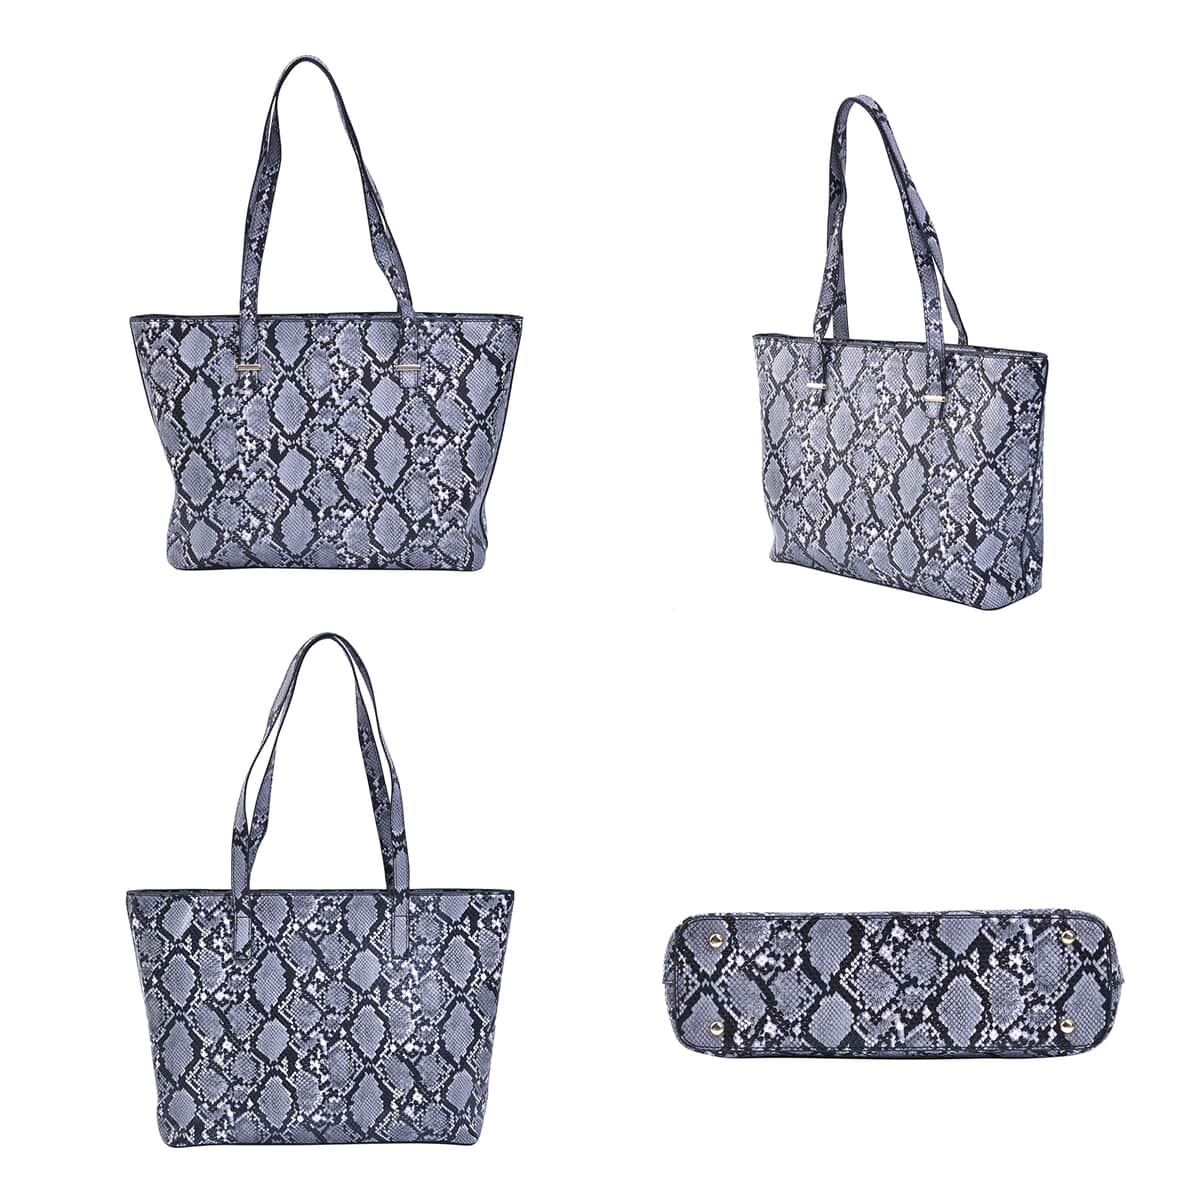 PASSAGE Black Snake Skin Pattern Faux Leather Totebag (13"x4"x10.5"), Crossbody Bag (10.24"x3.15"x7.5"), Clutch Bag (9.84"x6.3") and Wallet (7.87"x4") image number 2